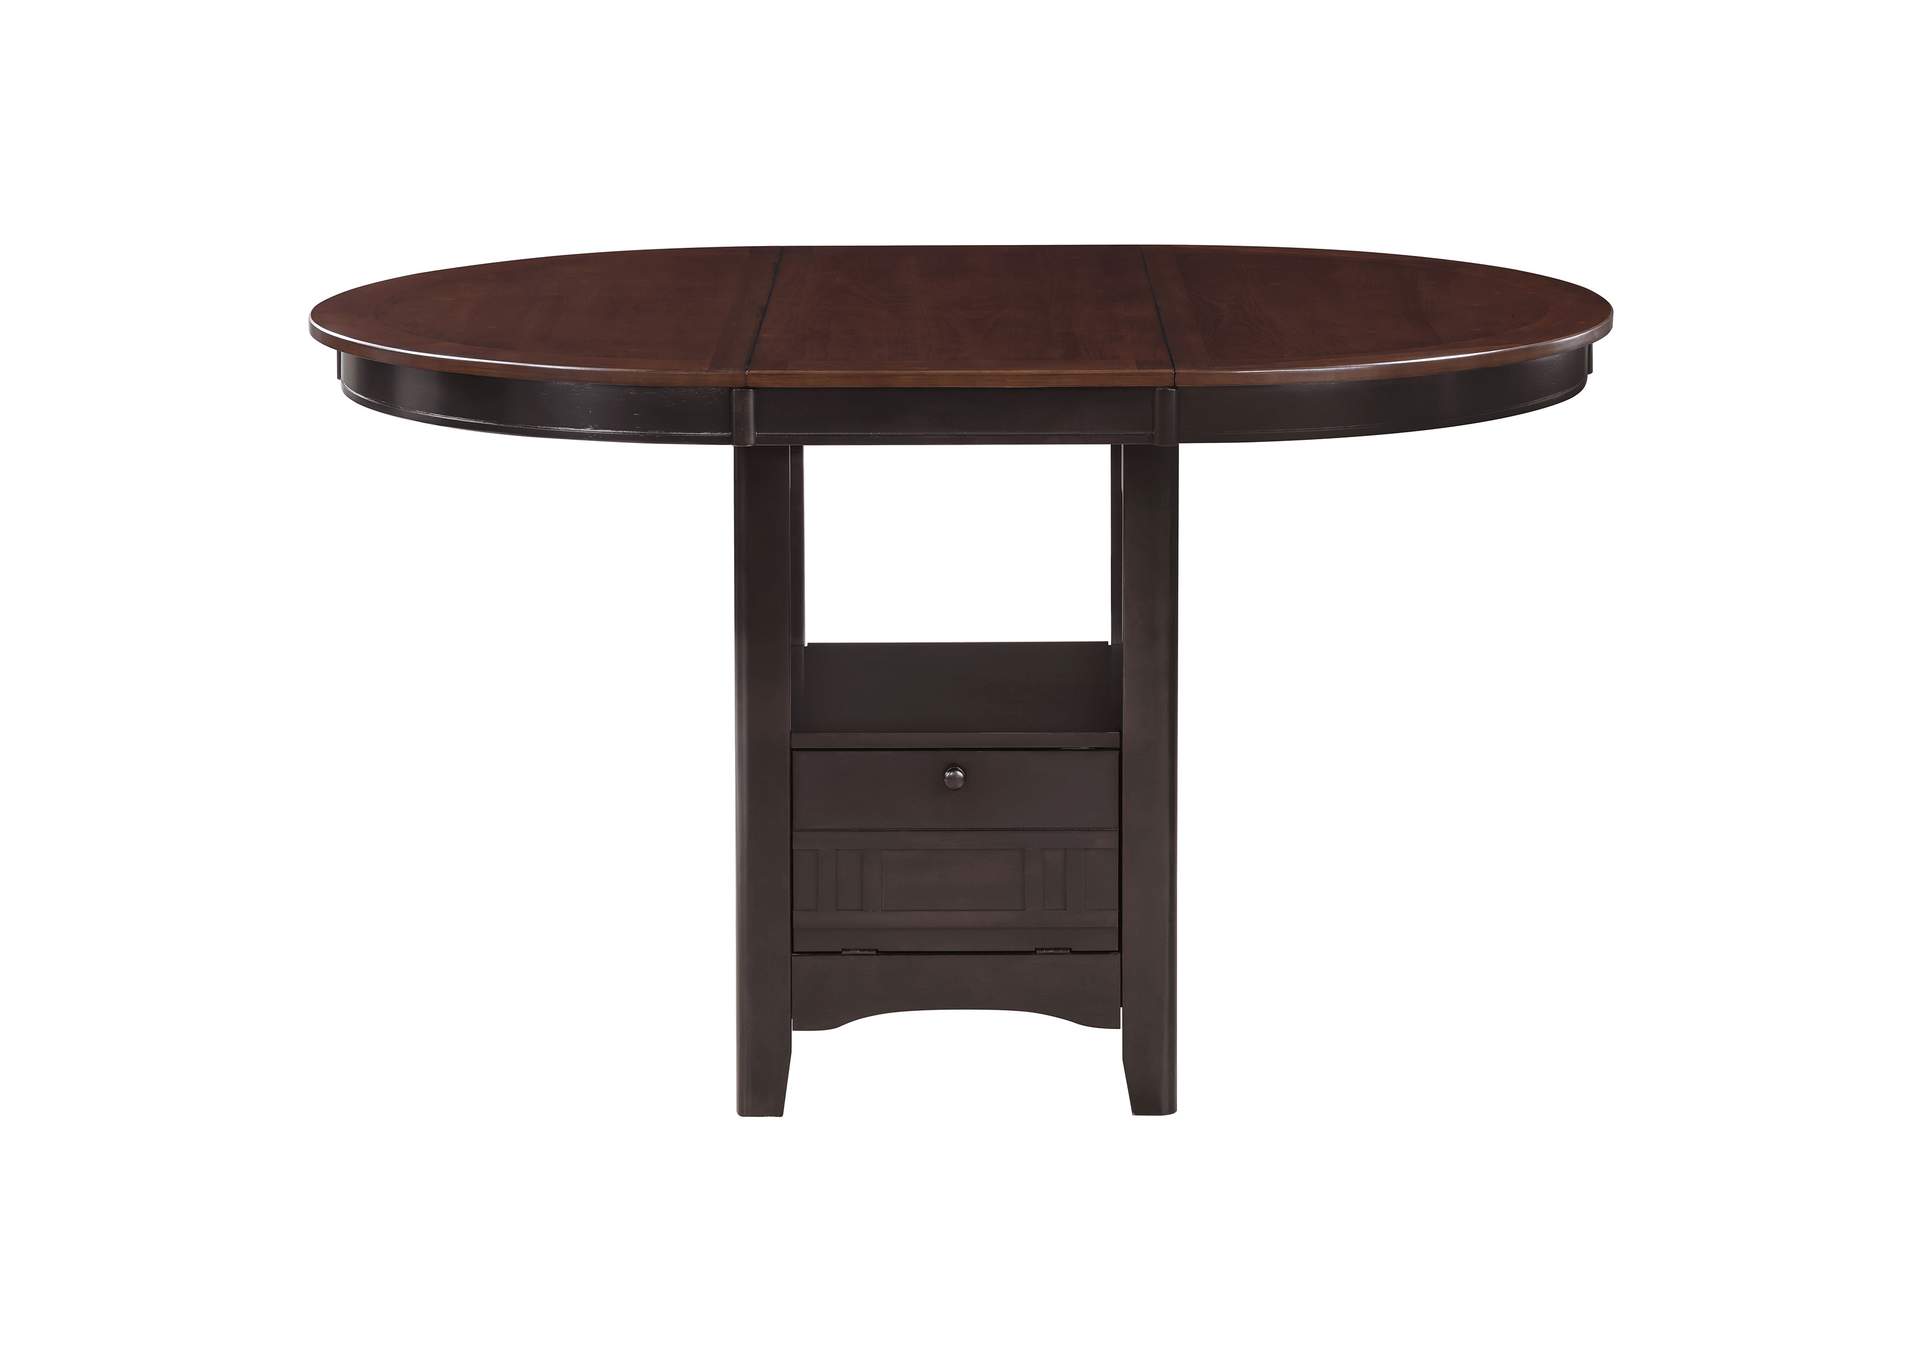 Lavon Oval Counter Height Table Light Chestnut and Espresso,Coaster Furniture